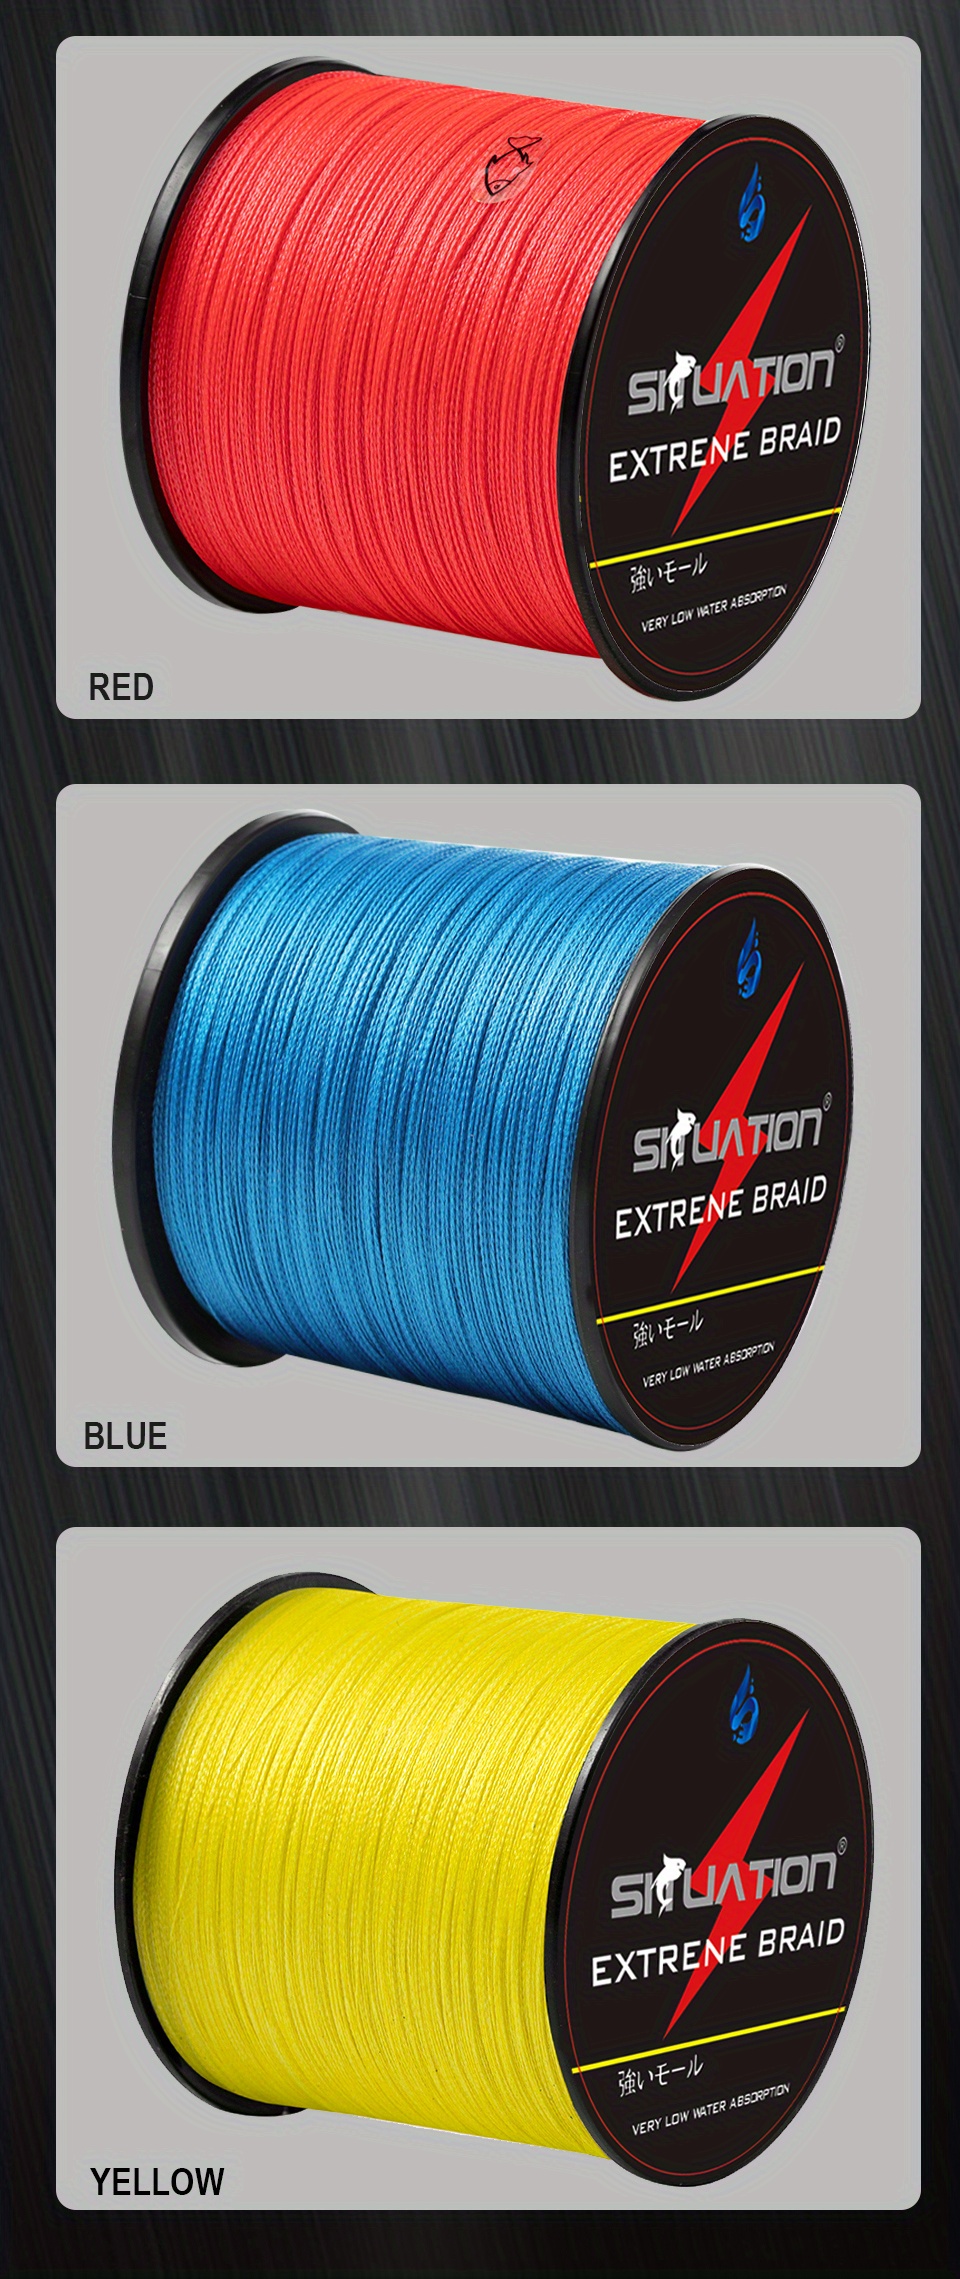 Hunthouse 4 strands cores pe braided fishing line multifilament